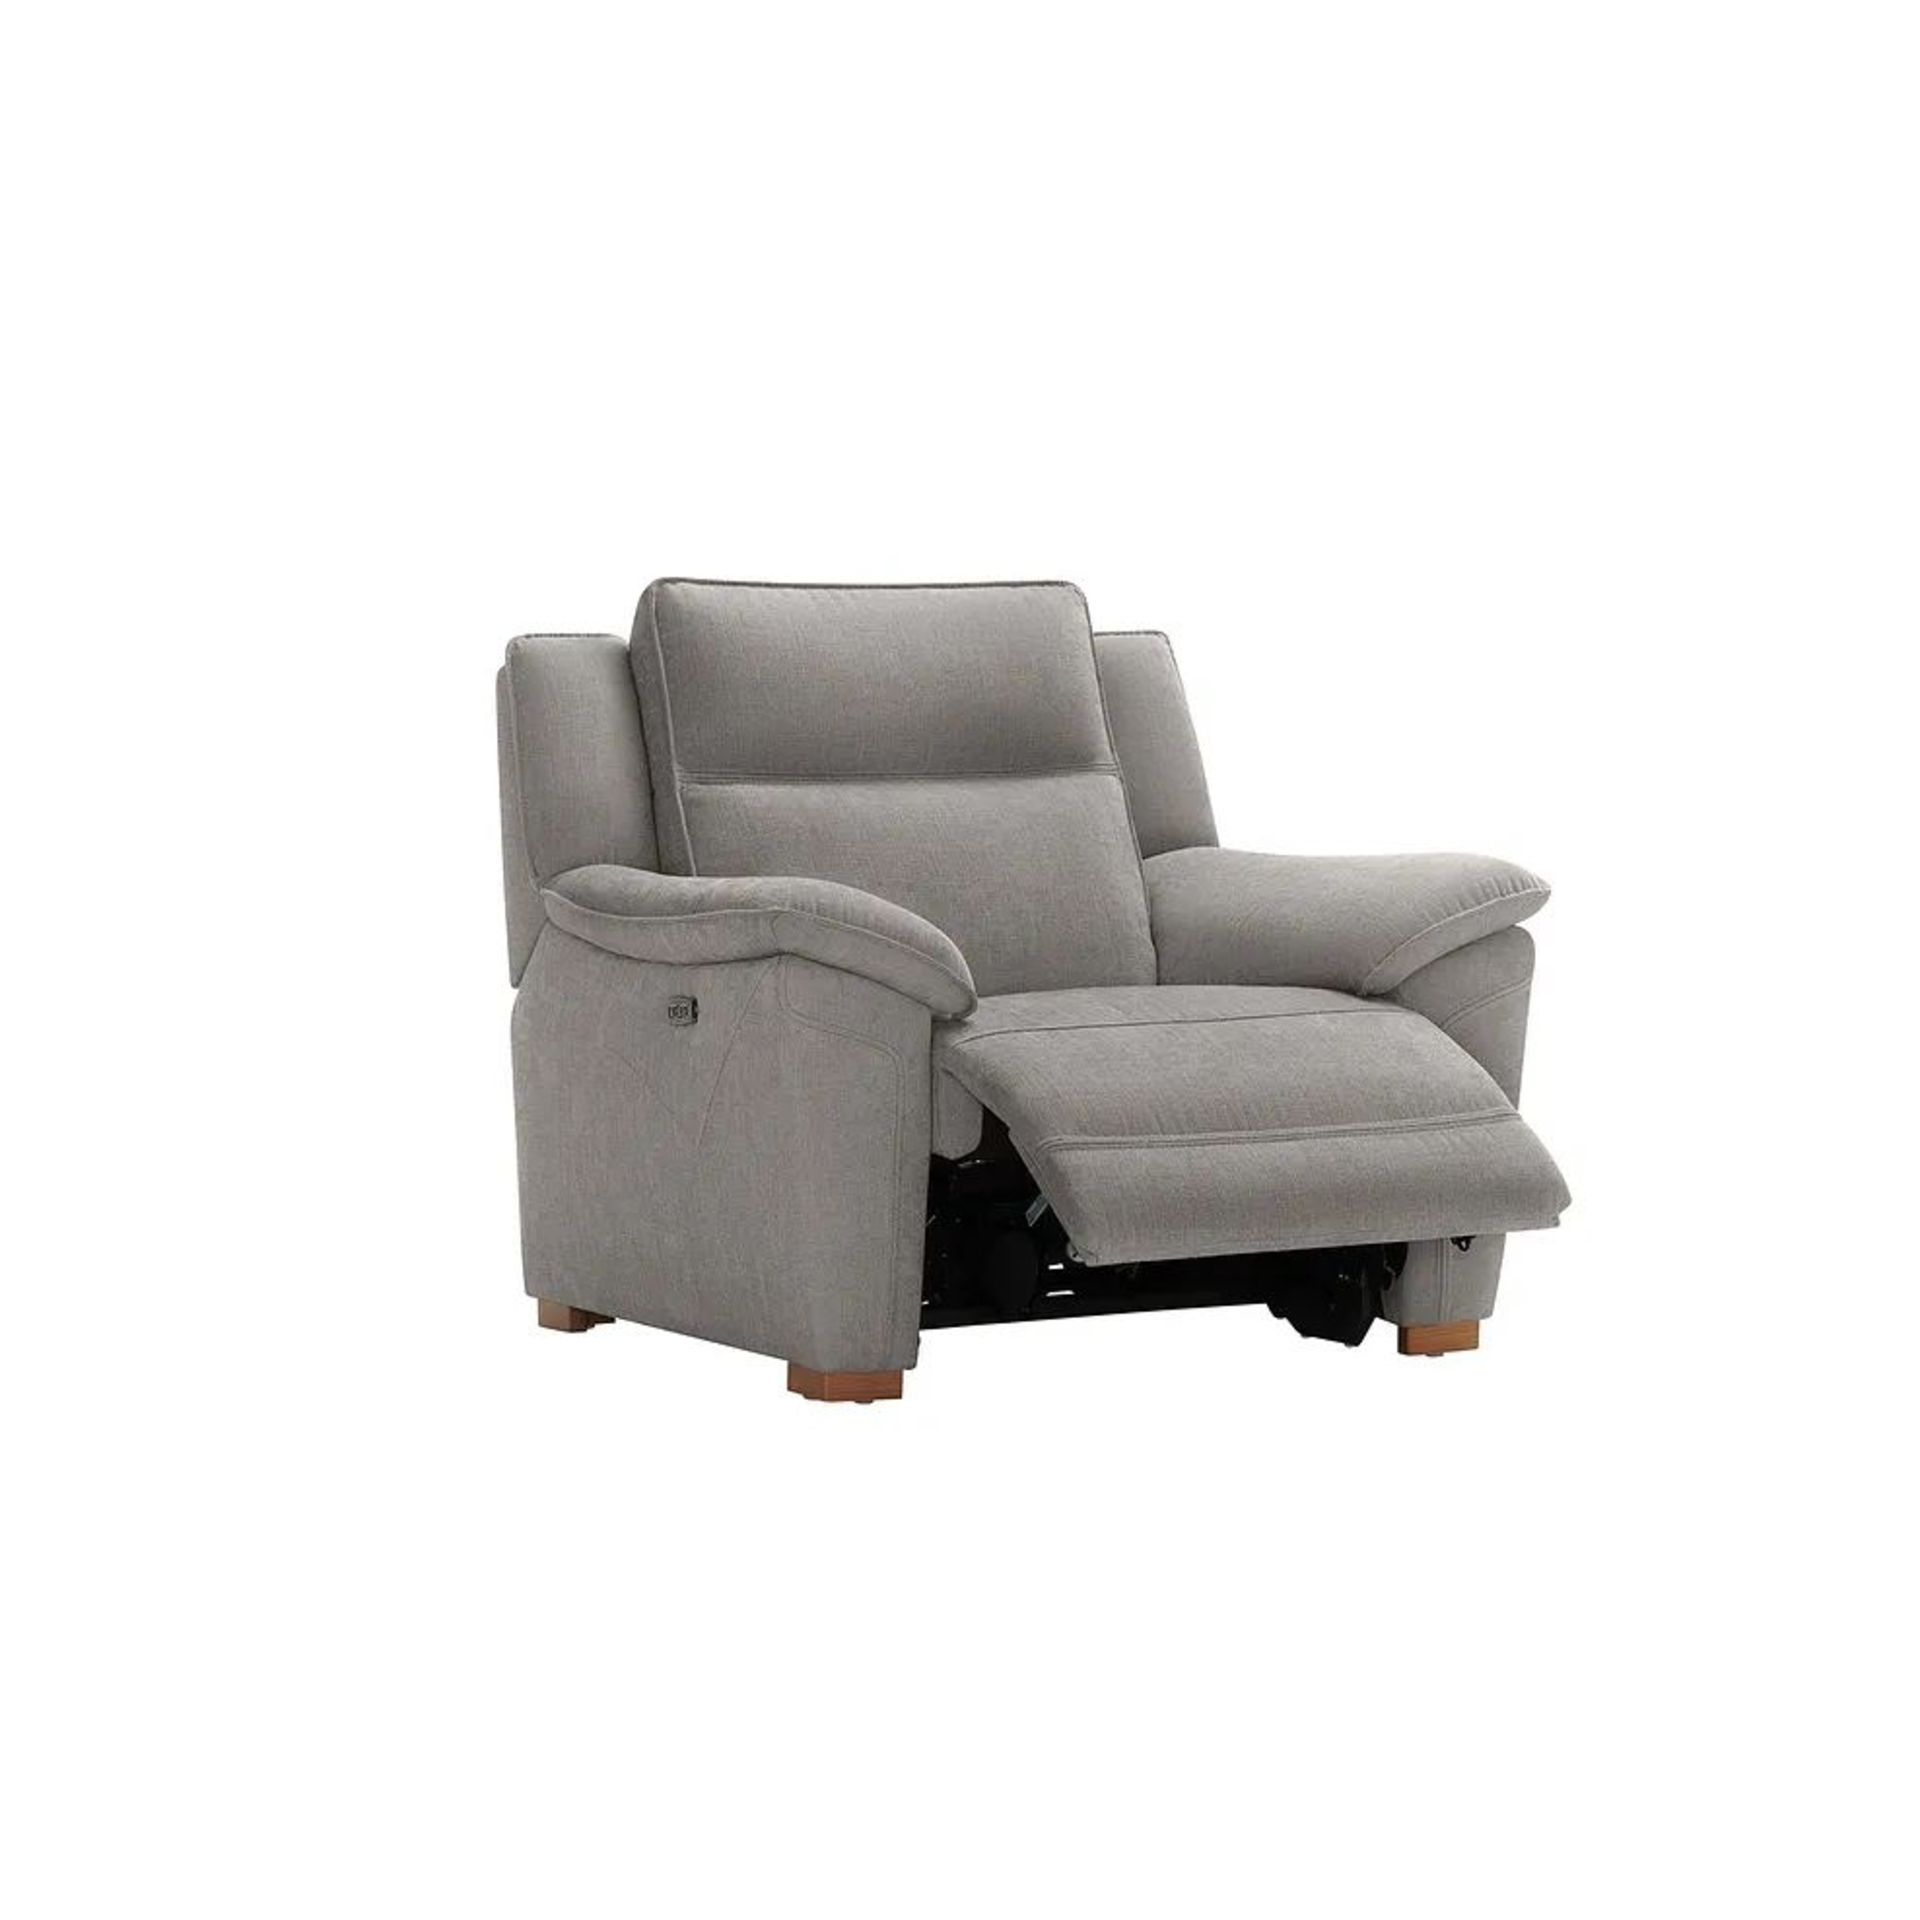 BRAND NEW DUNE Electric Recliner Armchair with Power Headrest - AMIGO GRANITE FABRIC. RRP £1099. - Image 4 of 12